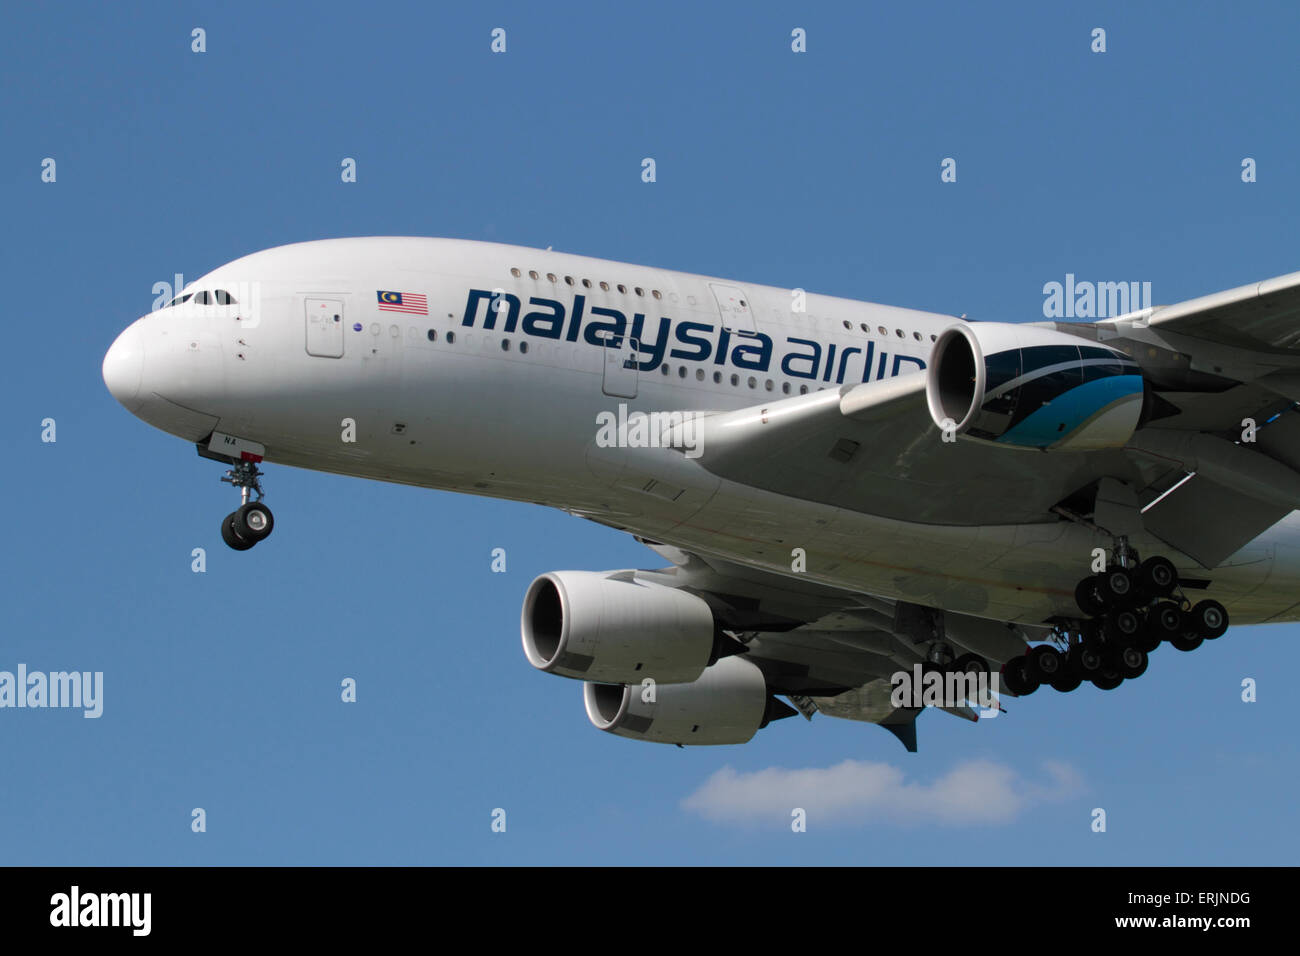 Closeup of a Malaysia Airlines Airbus A380 superjumbo airliner on approach. Modern civil aviation. Stock Photo